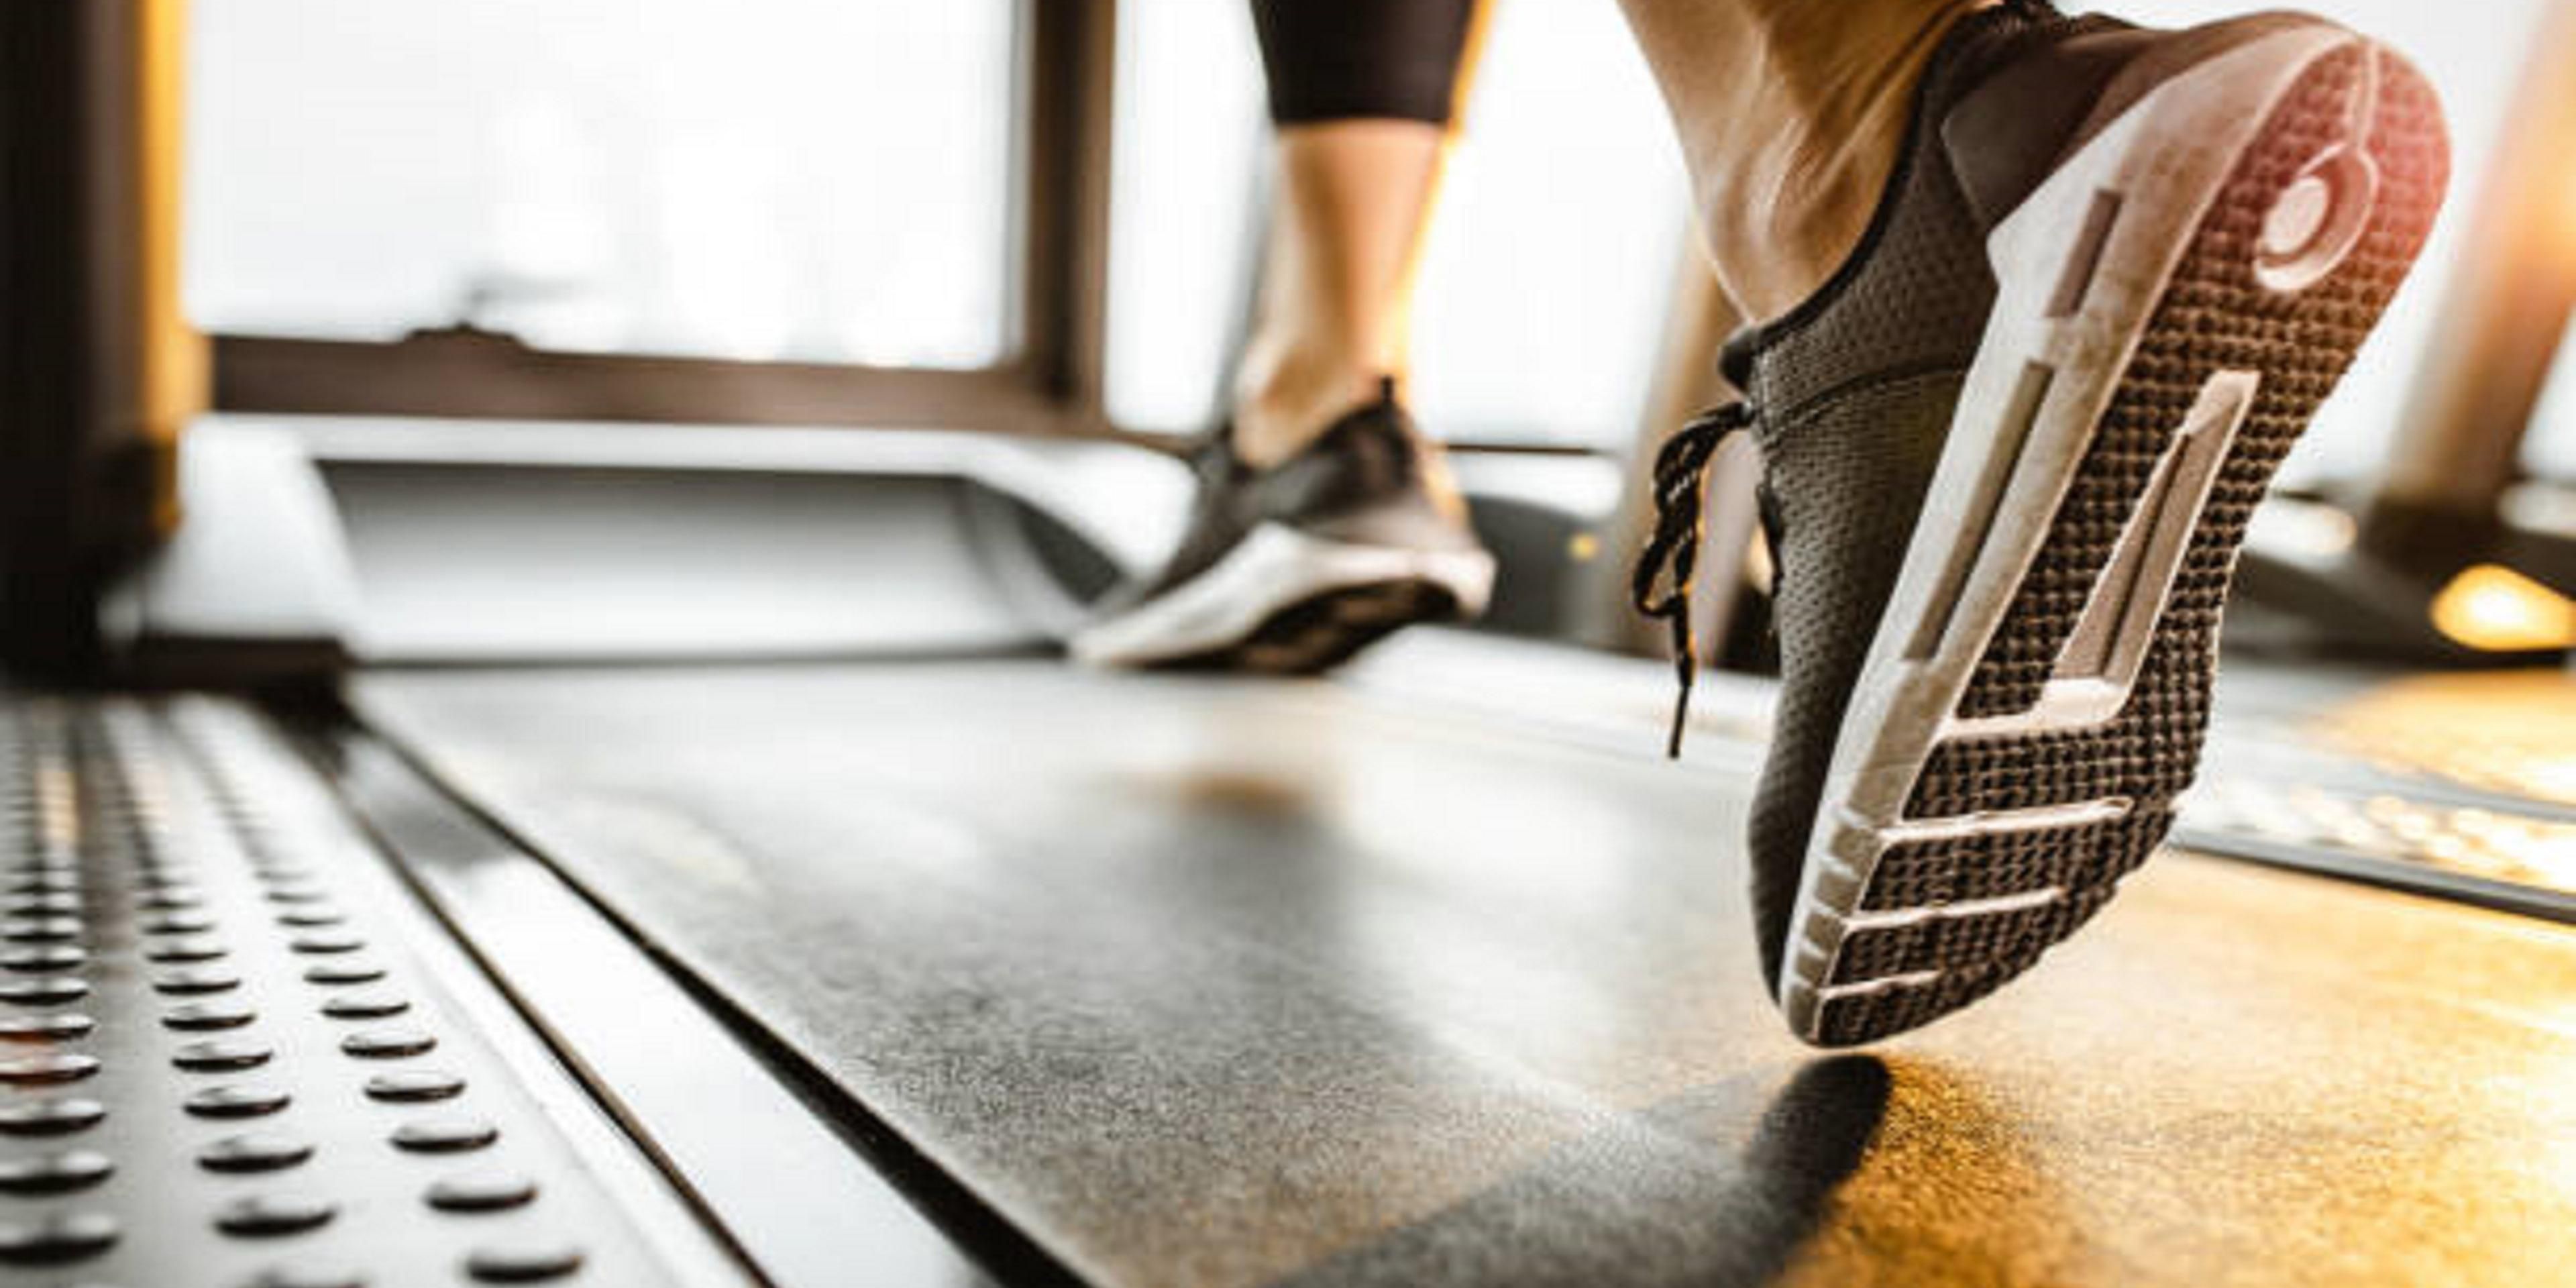 Get your sweat on in our complimentary, fully equipped Fitness Center with one treadmill, one elliptical and one stationary bike open 24 hours.